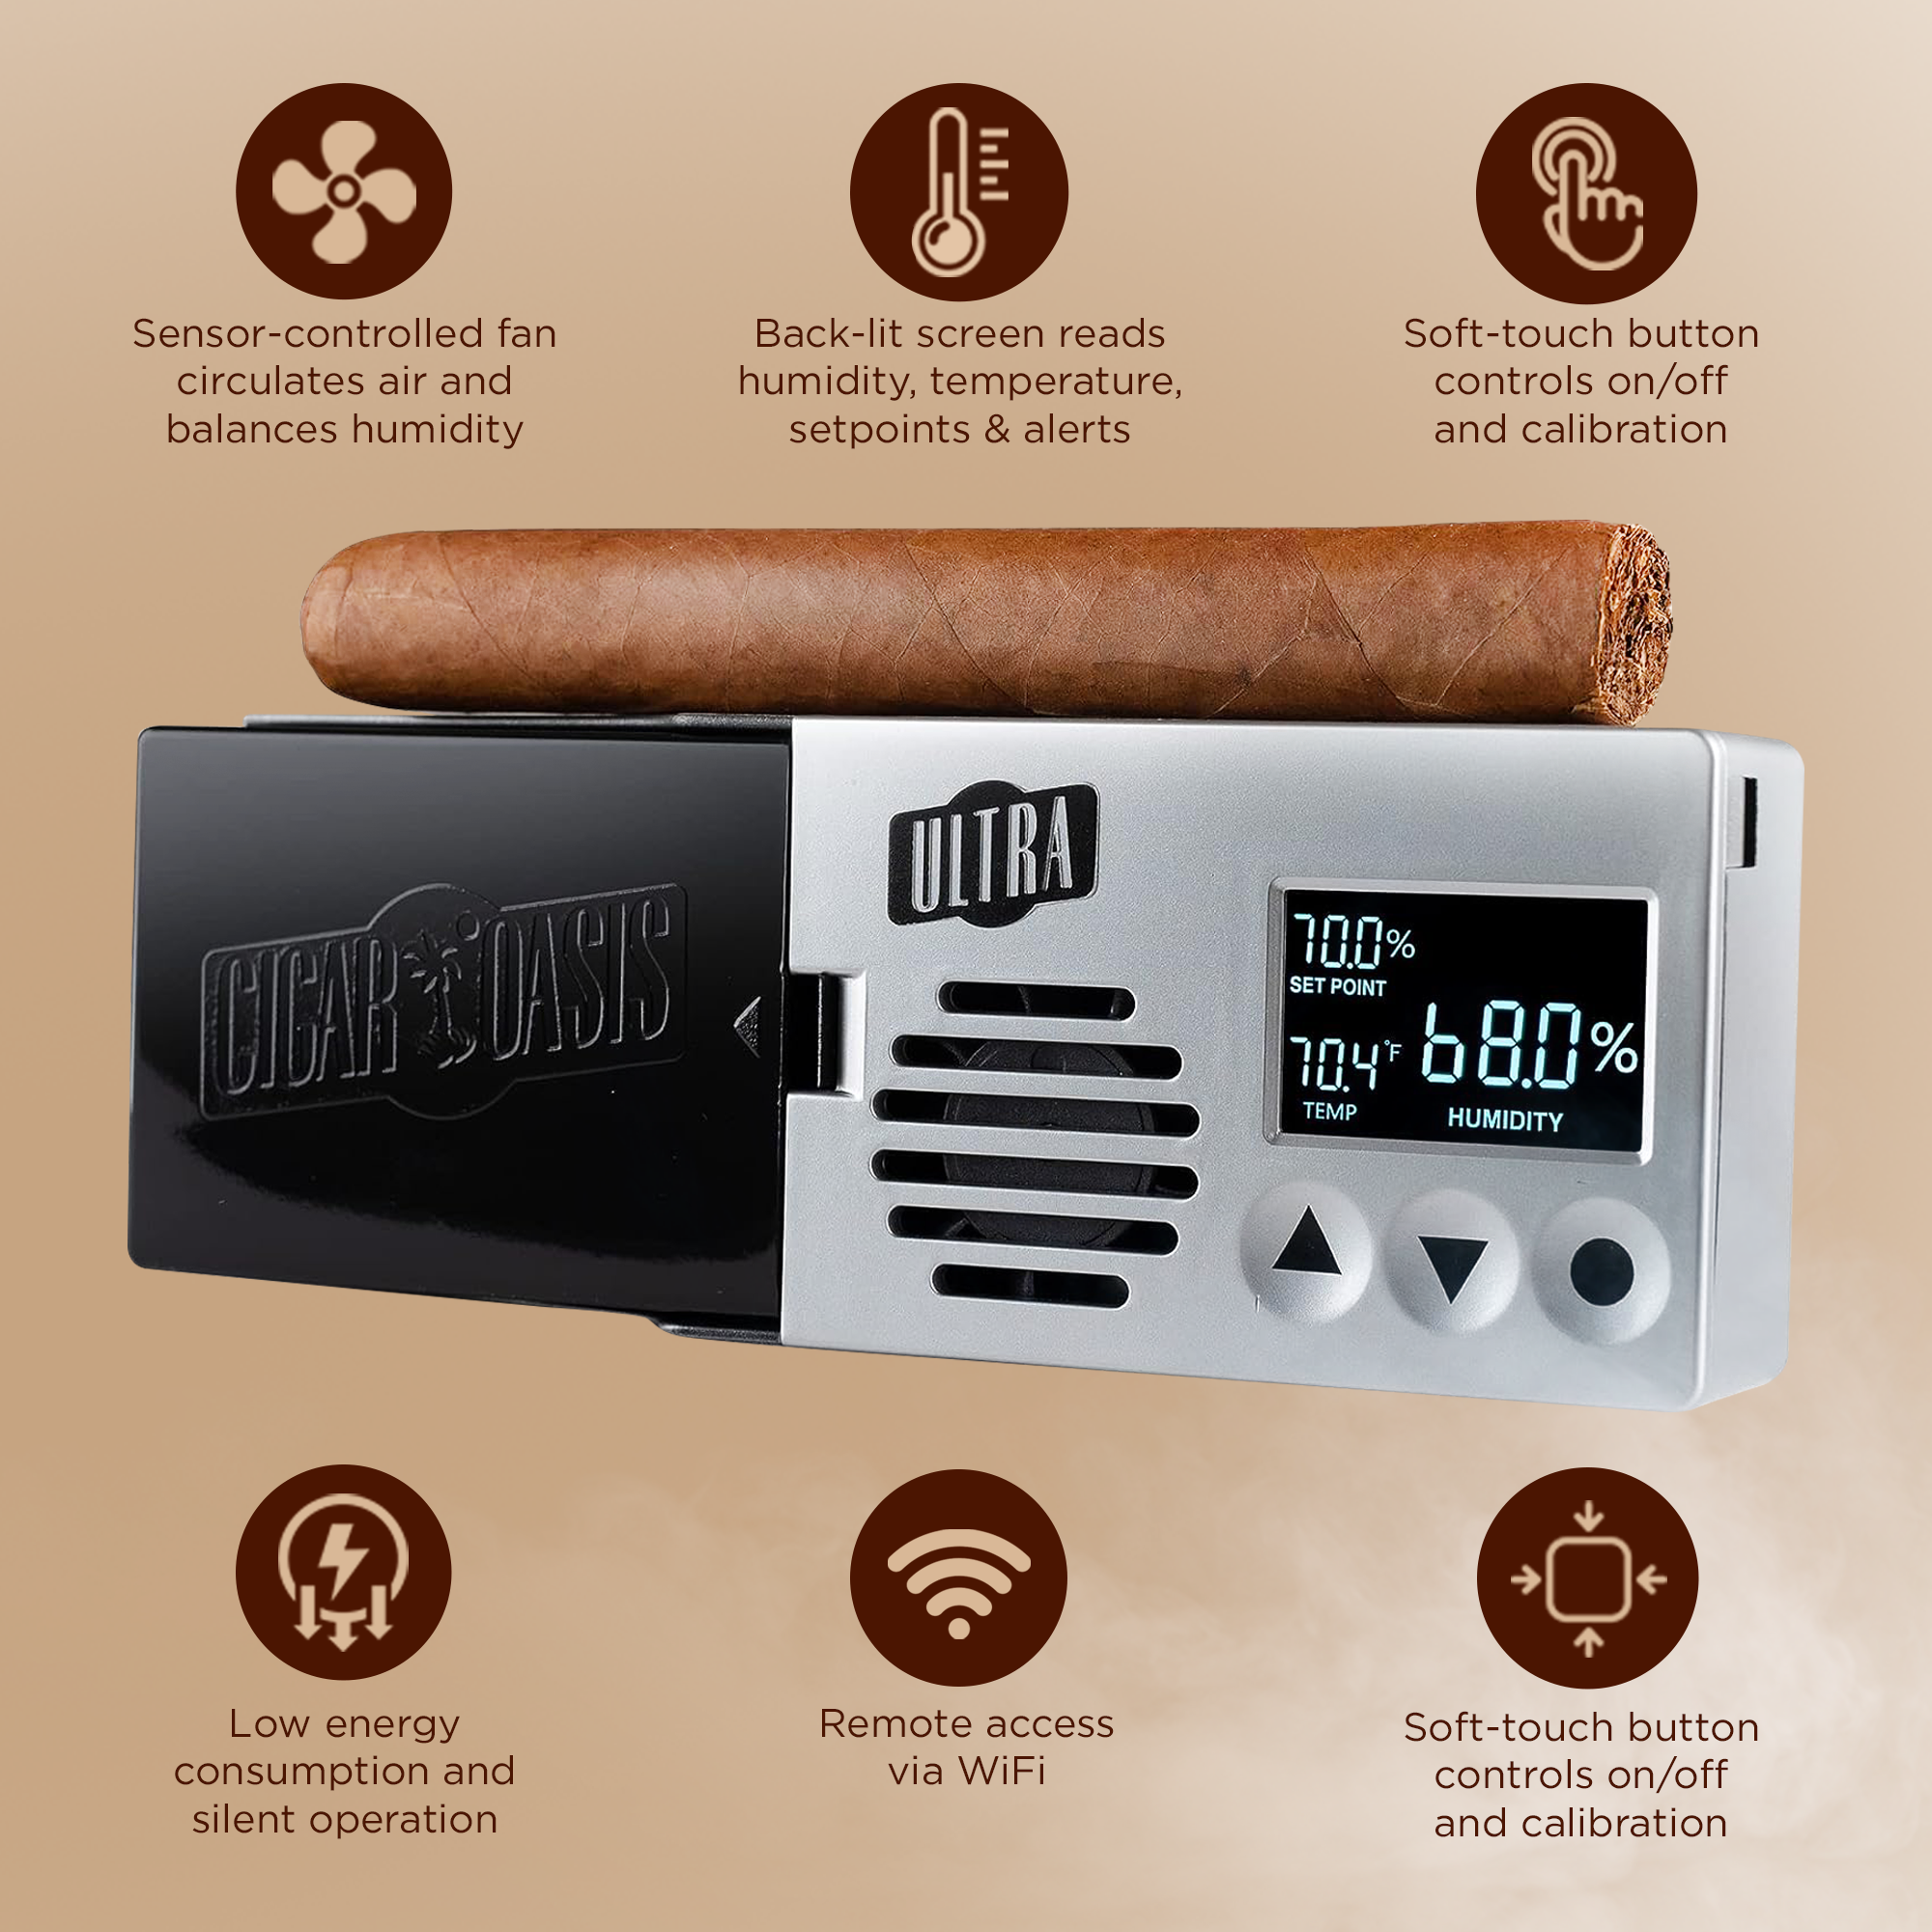 Cigar Oasis Magna 3.0 Electronic Humidifier for Large Cabinet Humidors